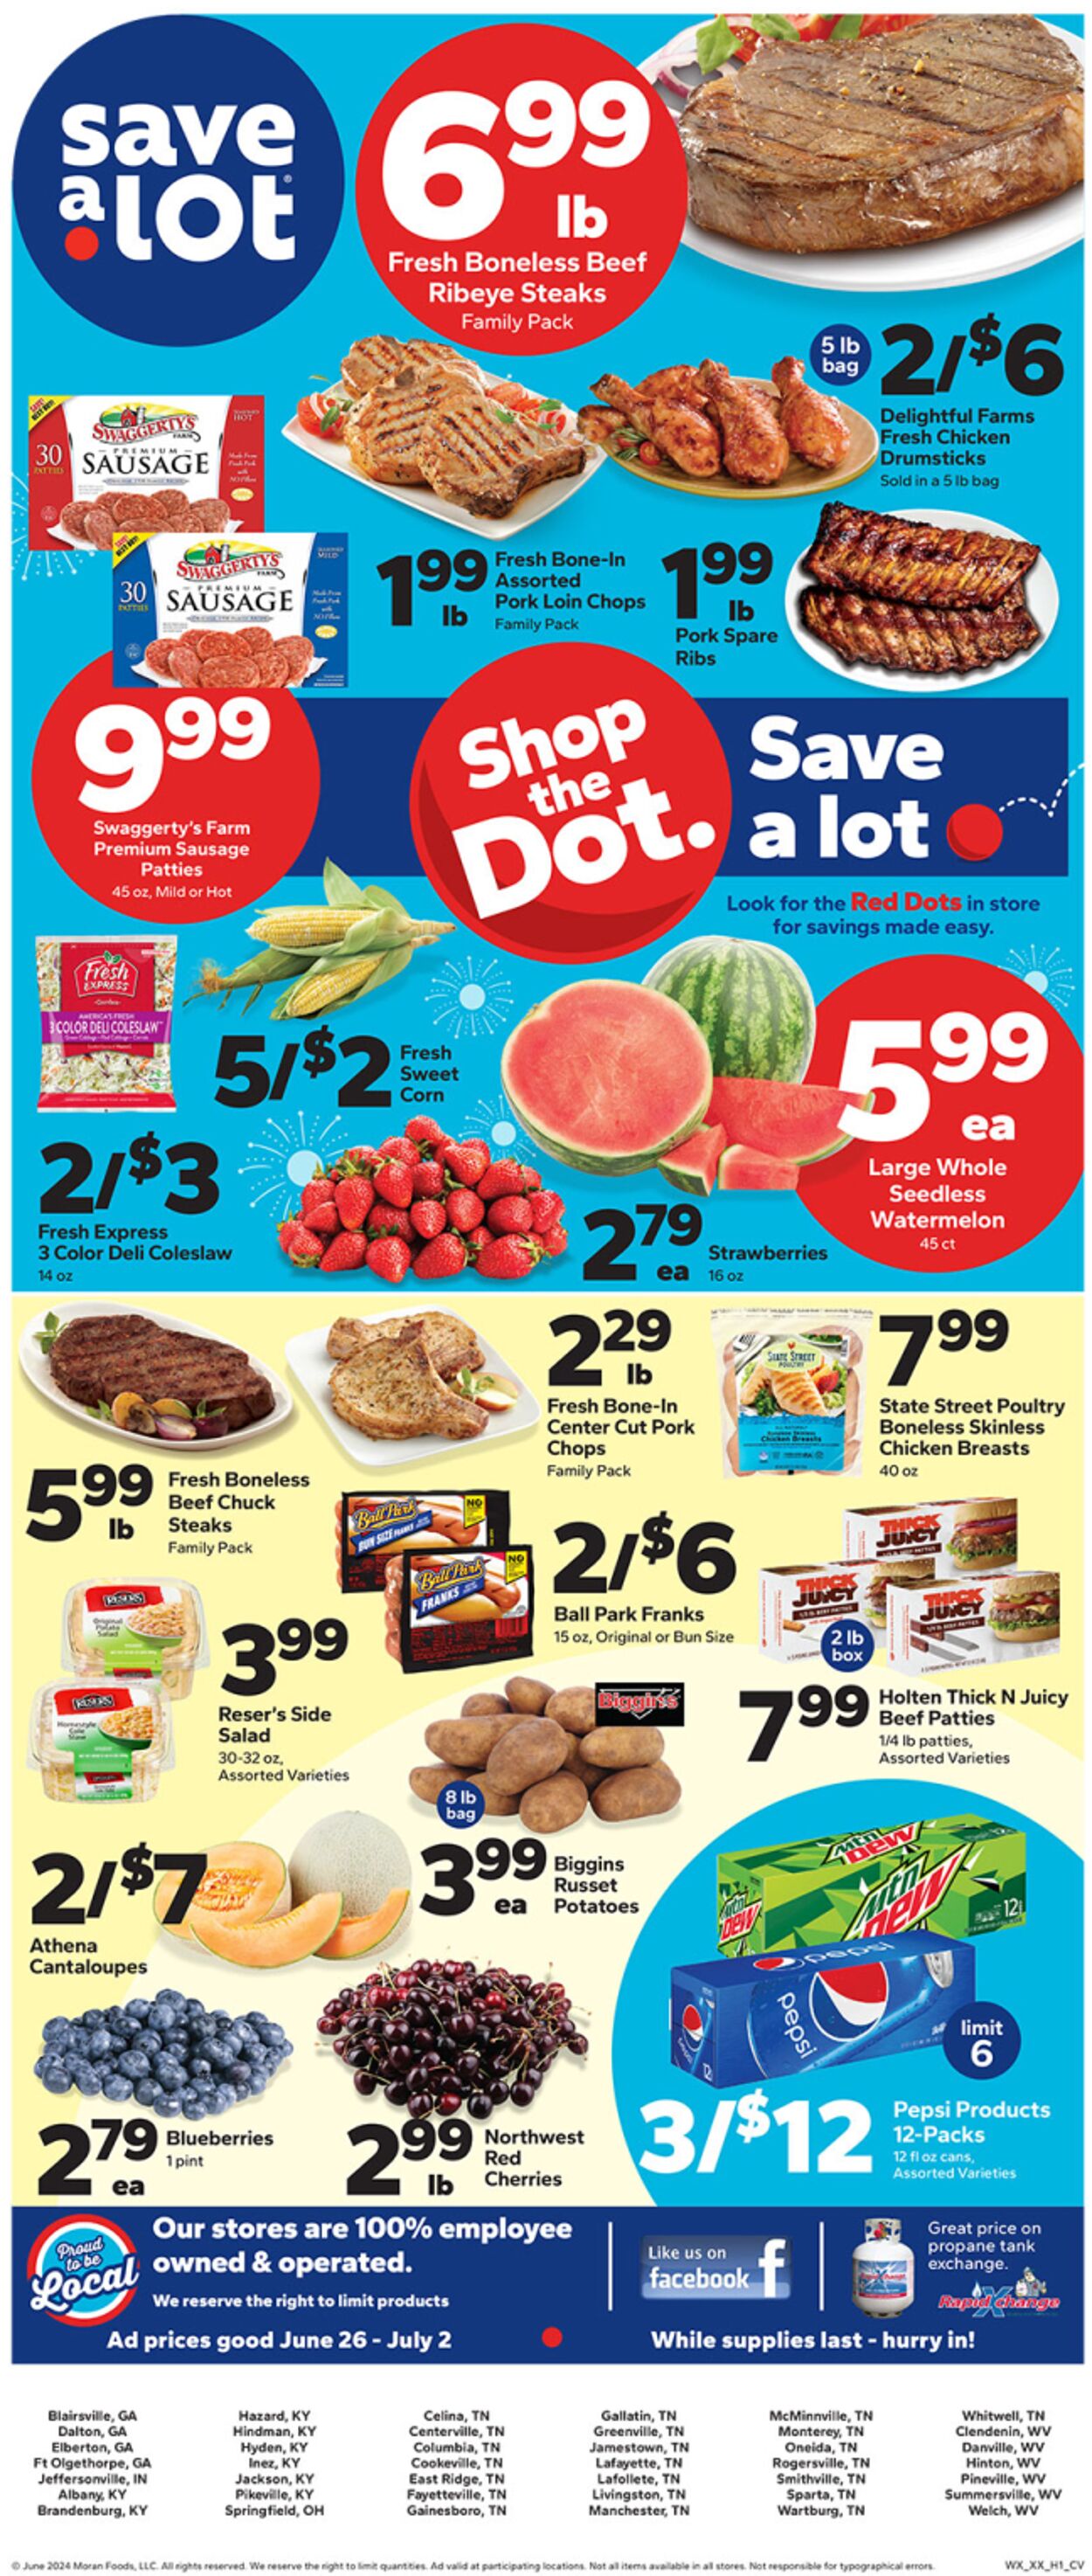 Save a Lot Promotional weekly ads